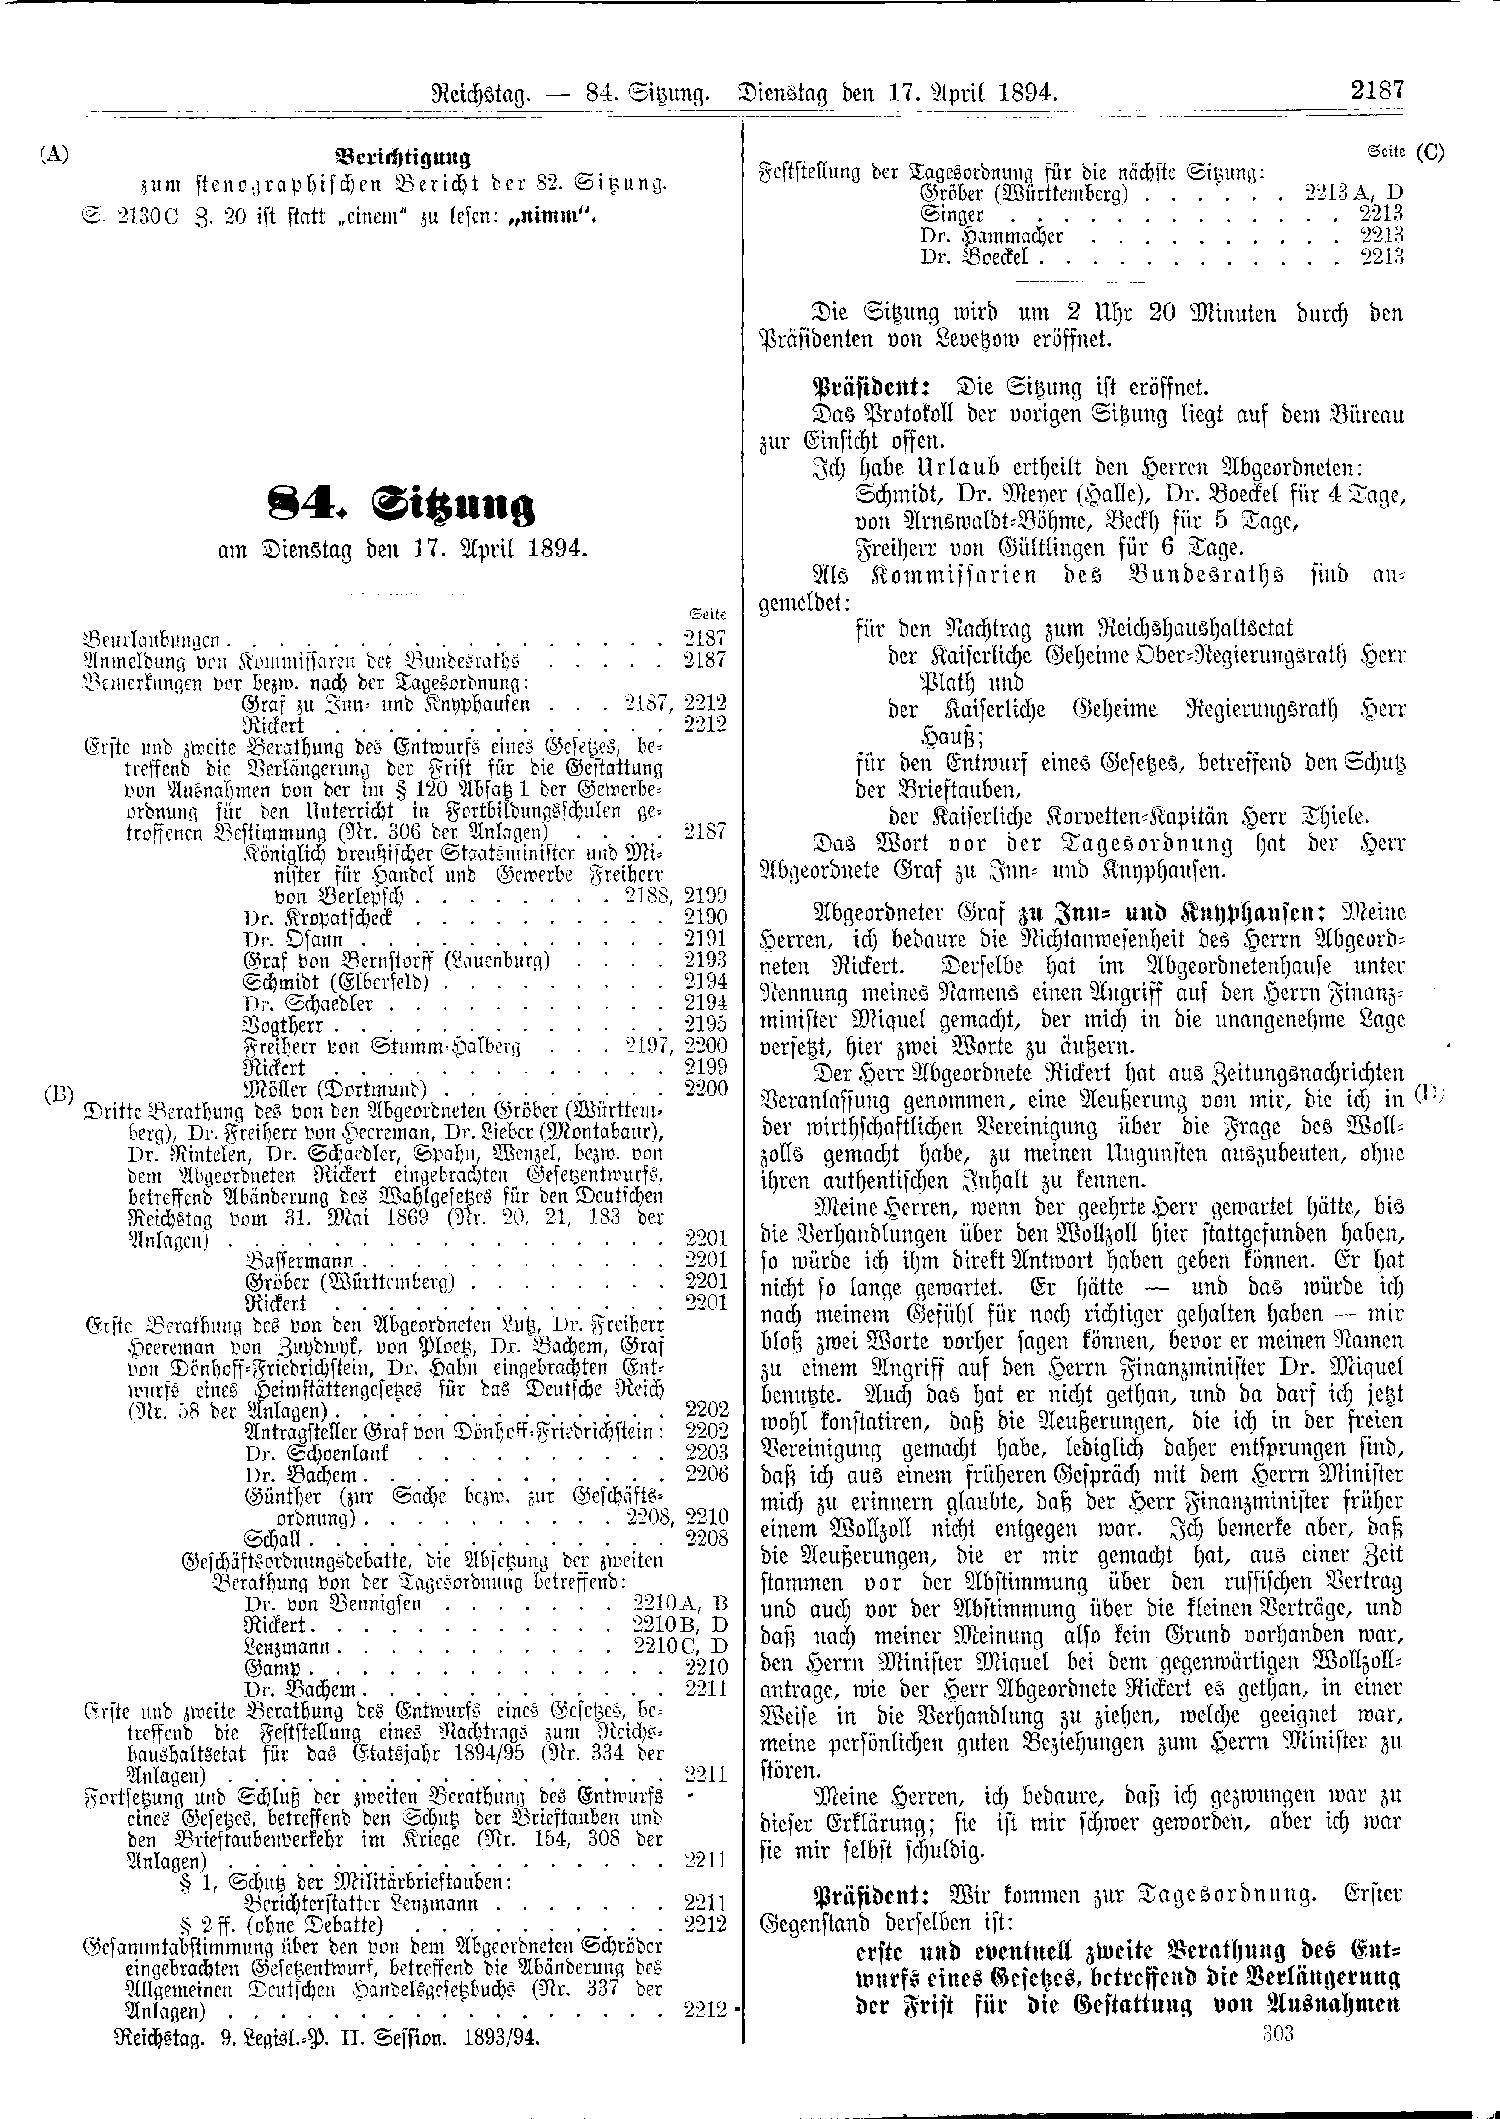 Scan of page 2187